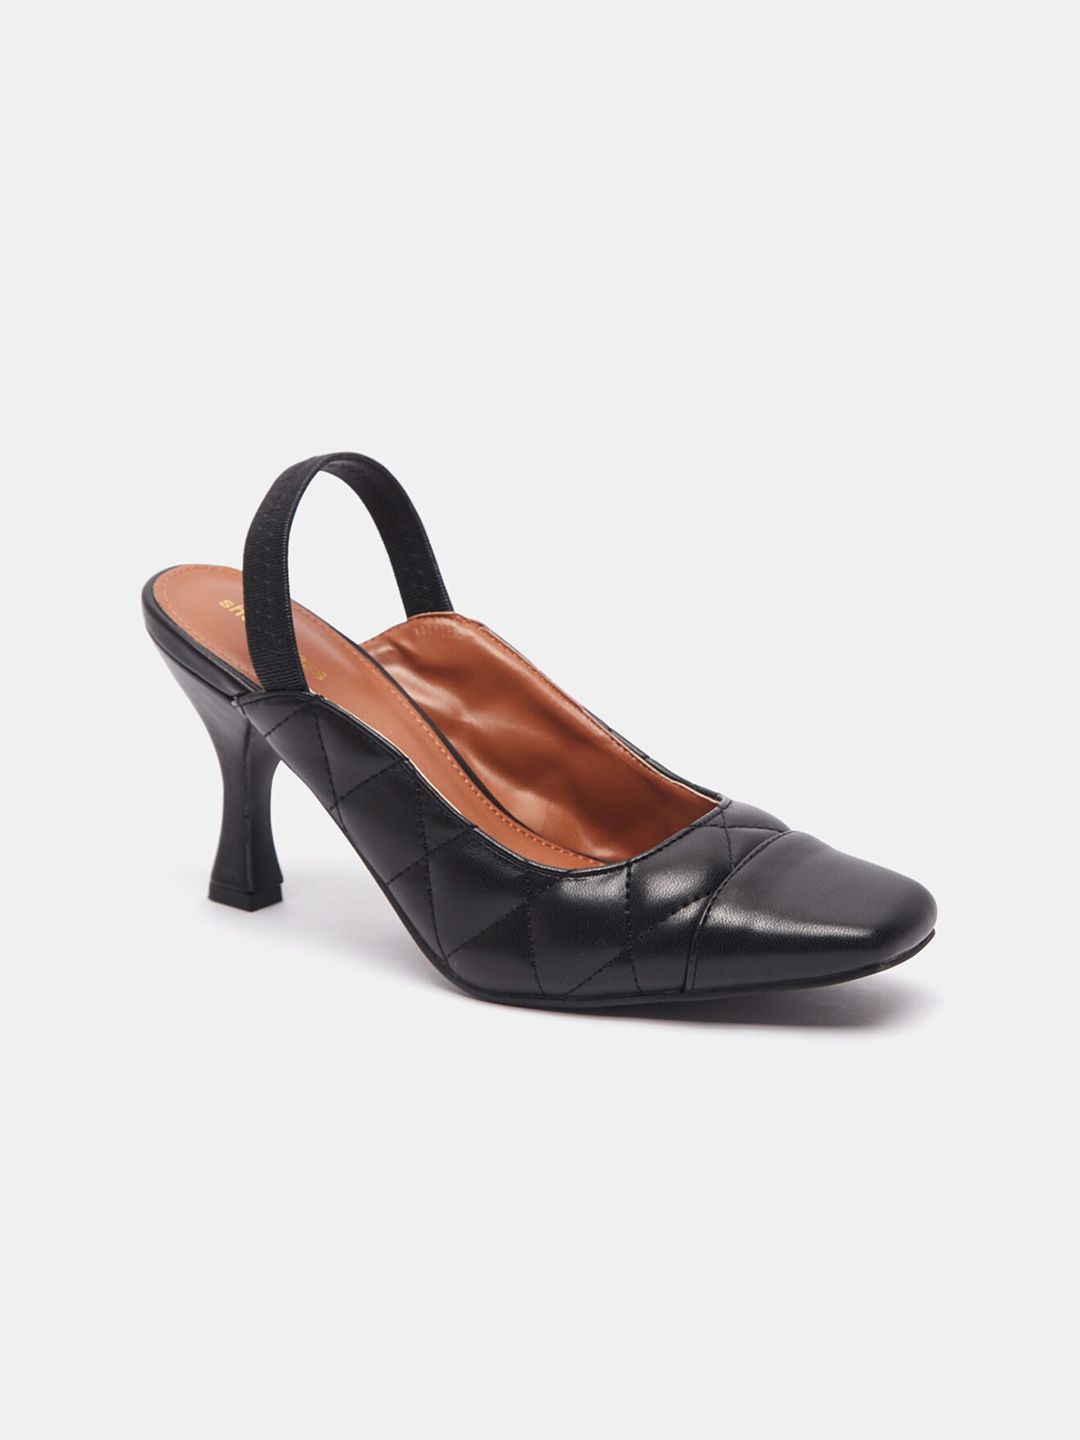 shoexpress Women Black Textured PU Pumps with Buckles Price in India